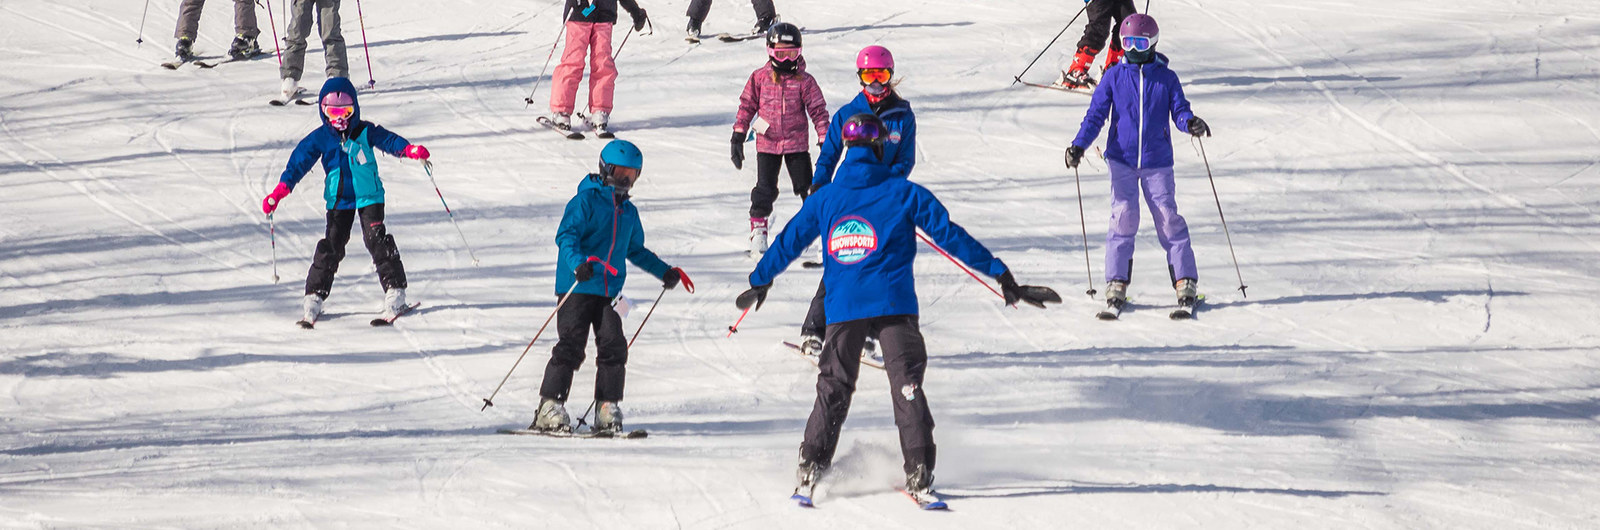 Ski instructor skiing backwards watching a group of kids in a lesson.